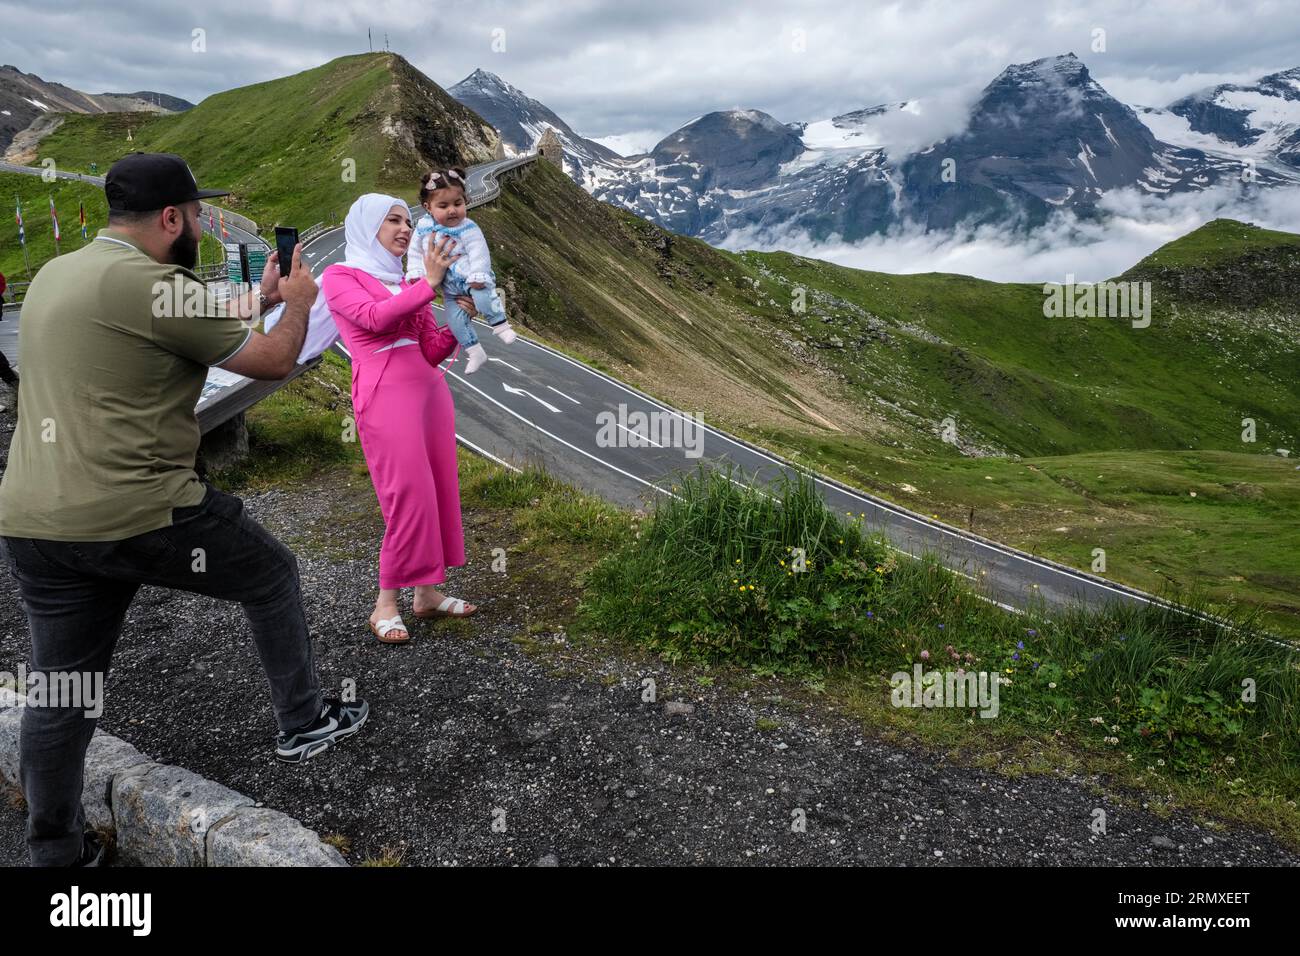 A Middle Eastern tourist photographing his wife and baby daughter at the Grossglockner High Alpine Road, Hohe Tauern National Park, Austria Stock Photo